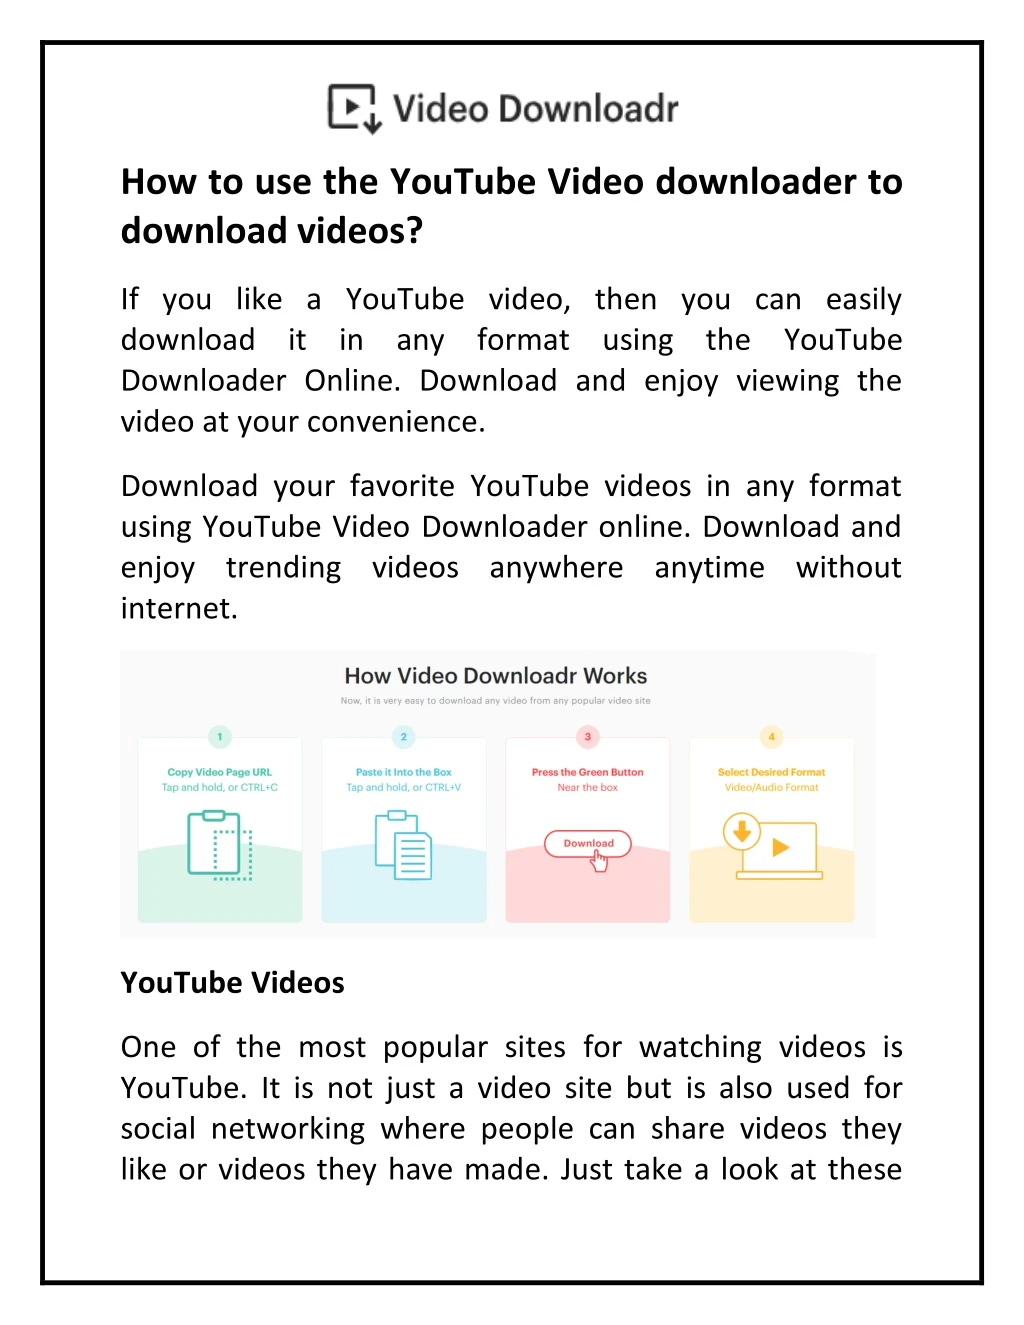 how to use the youtube video downloader